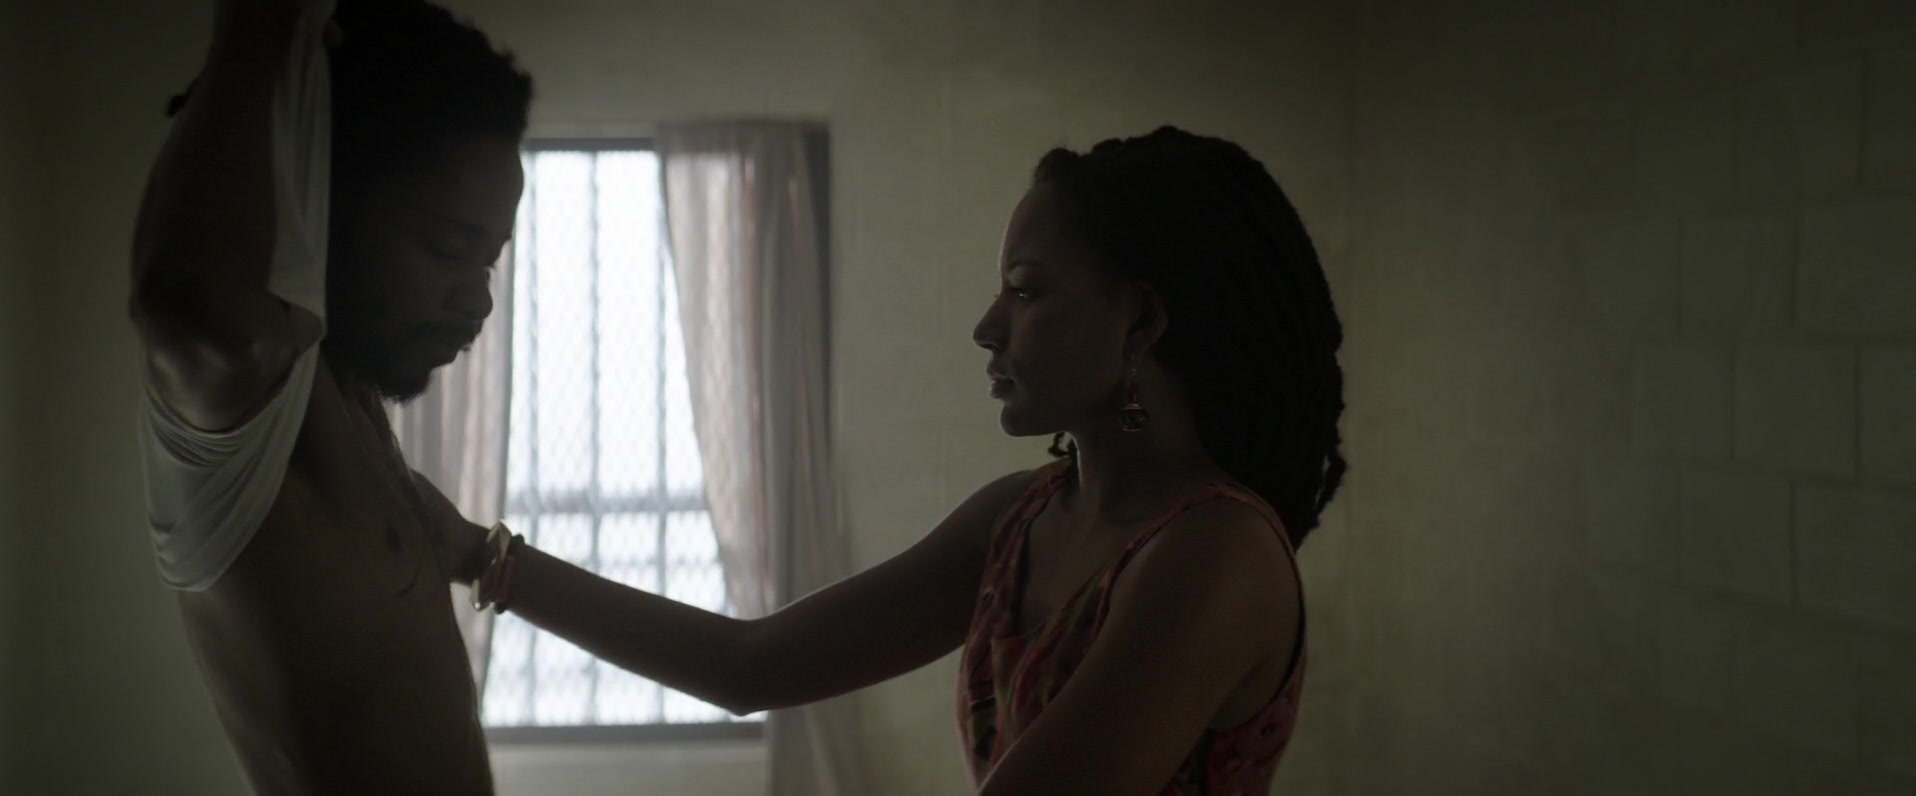 Here the best scenes are Natalie Paul naked - Crown Heights (2017). 